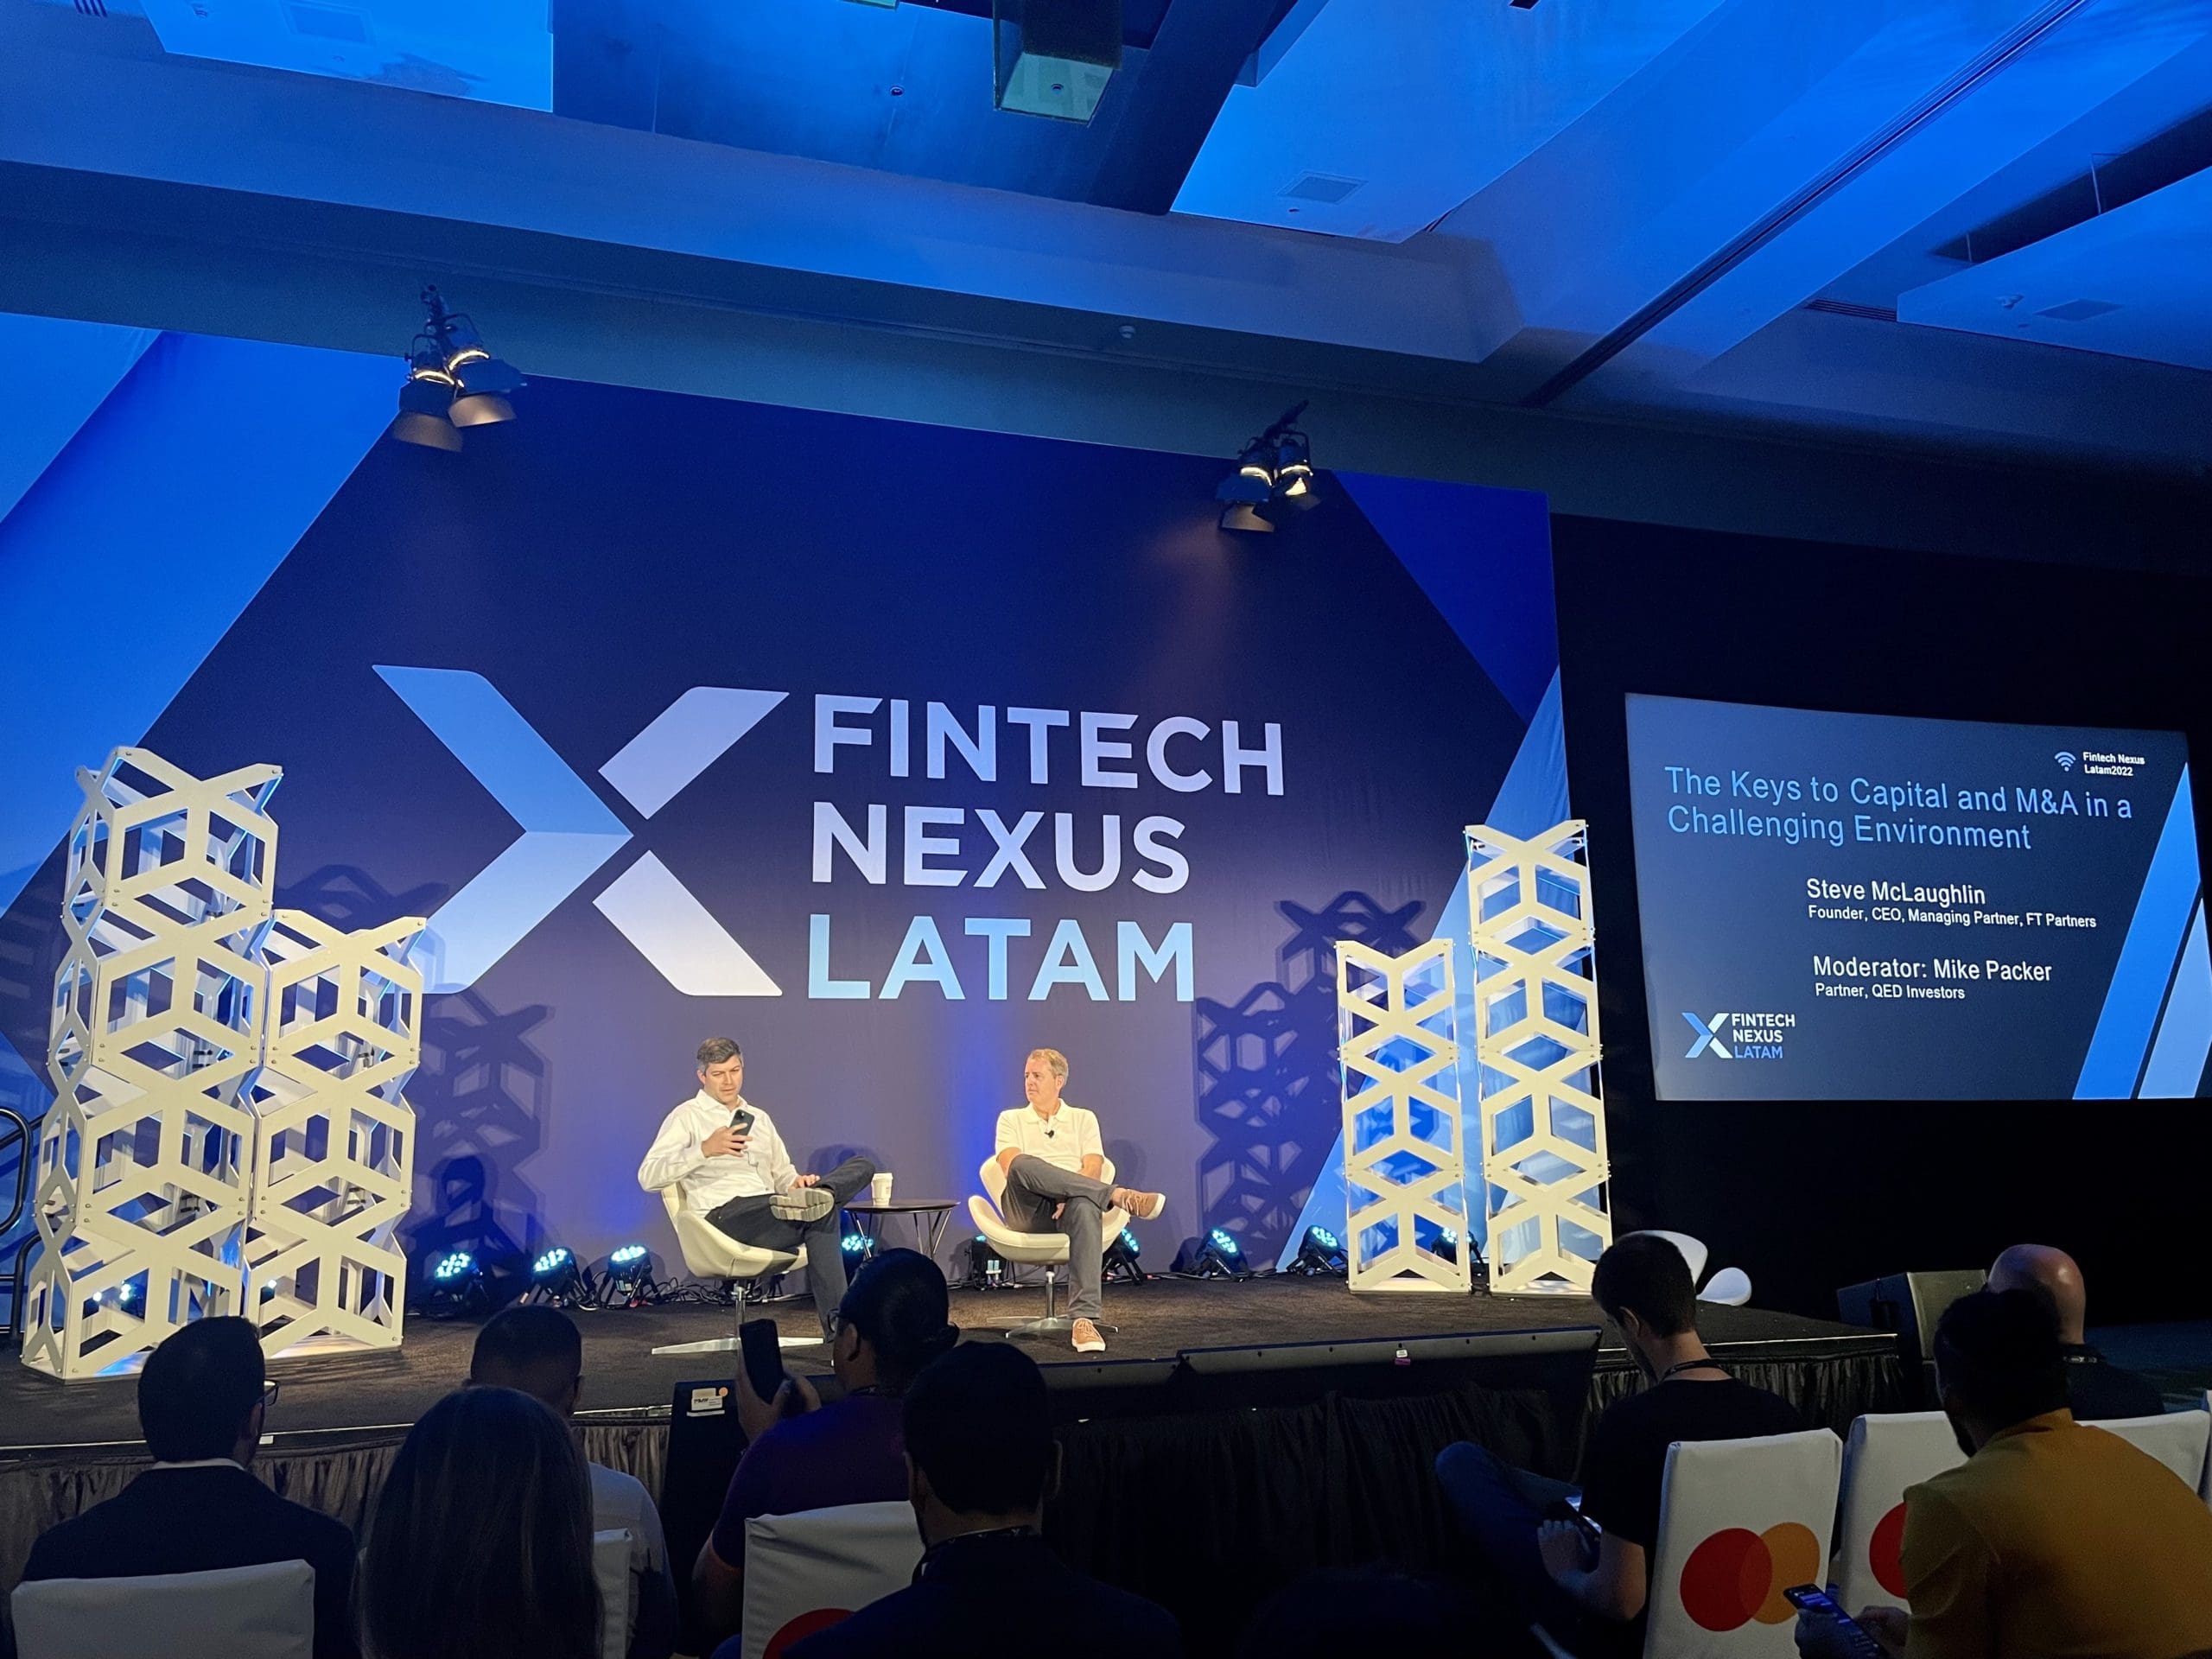 Mike Packer, QED Investors (left), chats with Steve McLaughlin FT Partners talked raising capital on the Latam keynote stage in Miami, Florida, on December 13, 2022